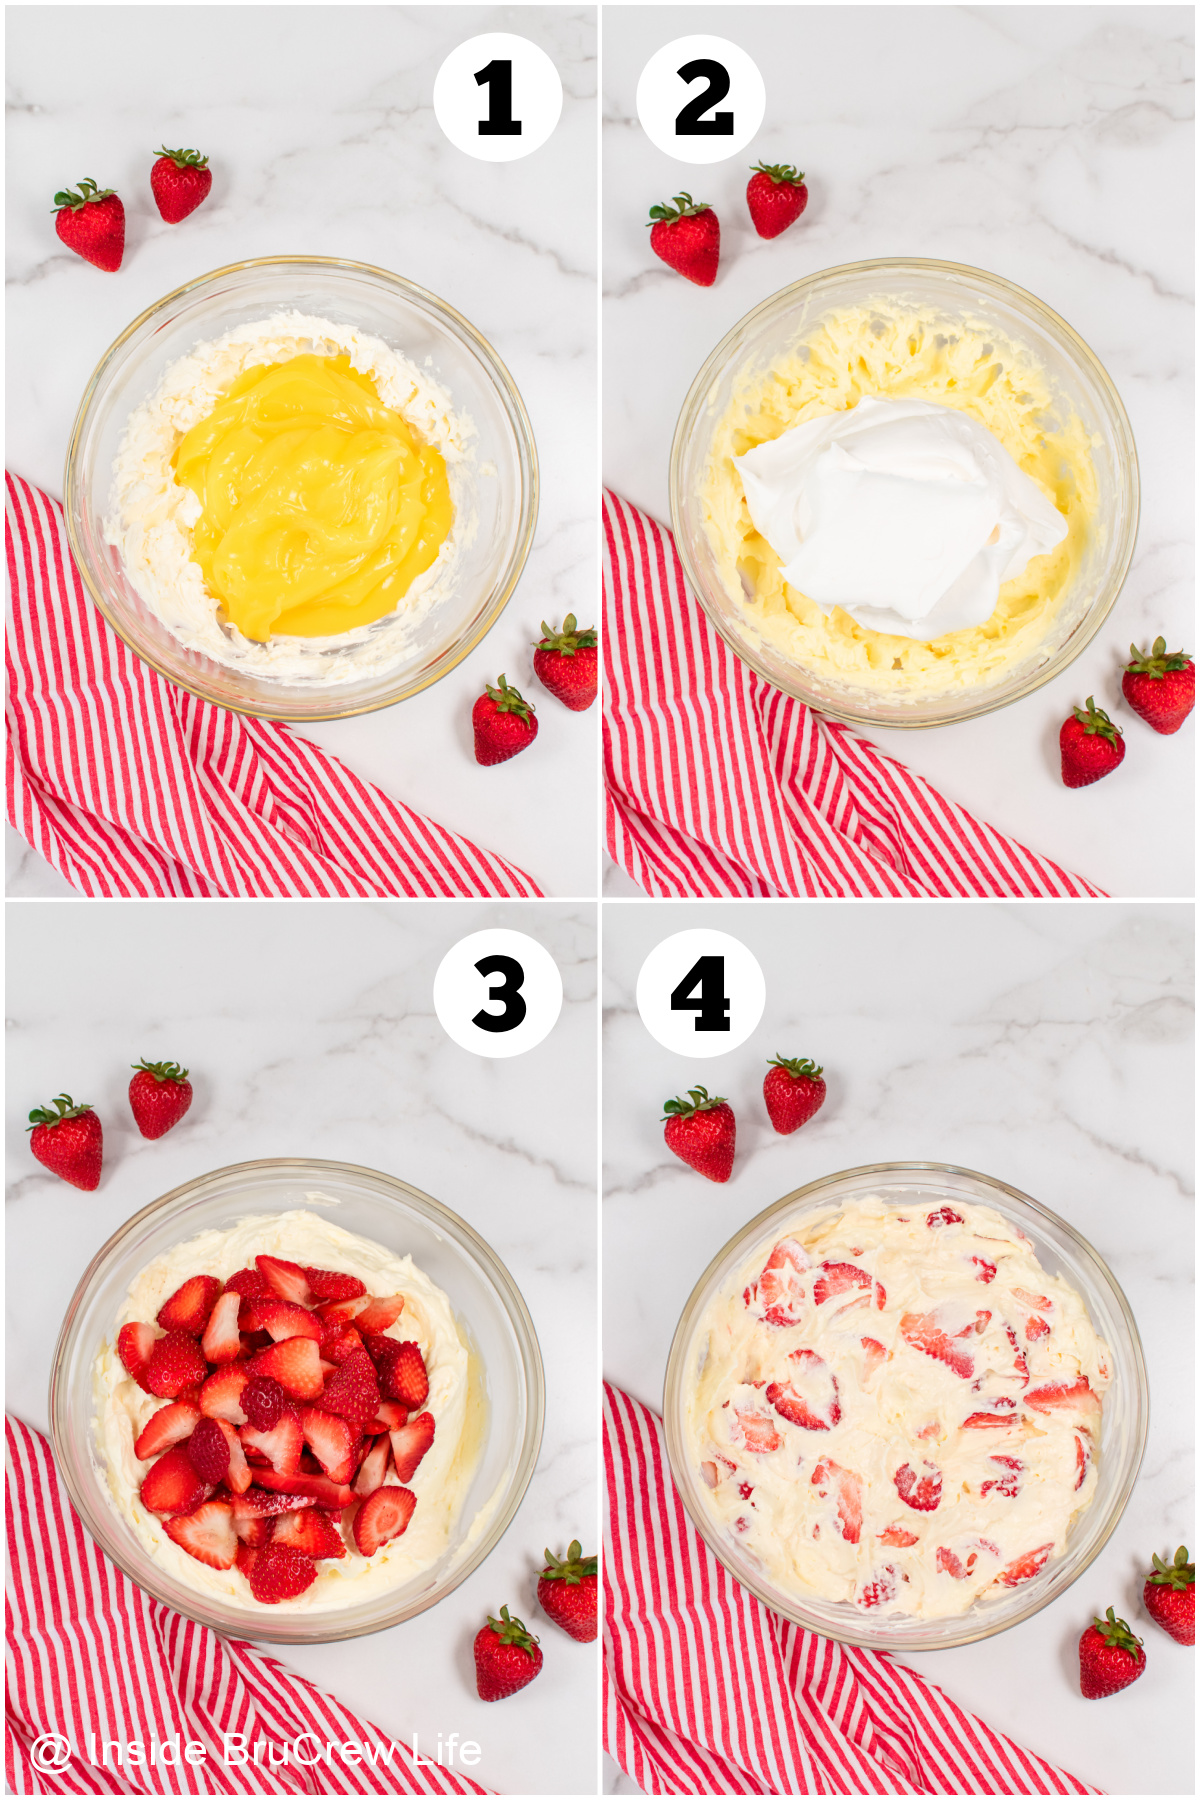 Four pictures collaged together showing how to make a lemon fluff dessert.